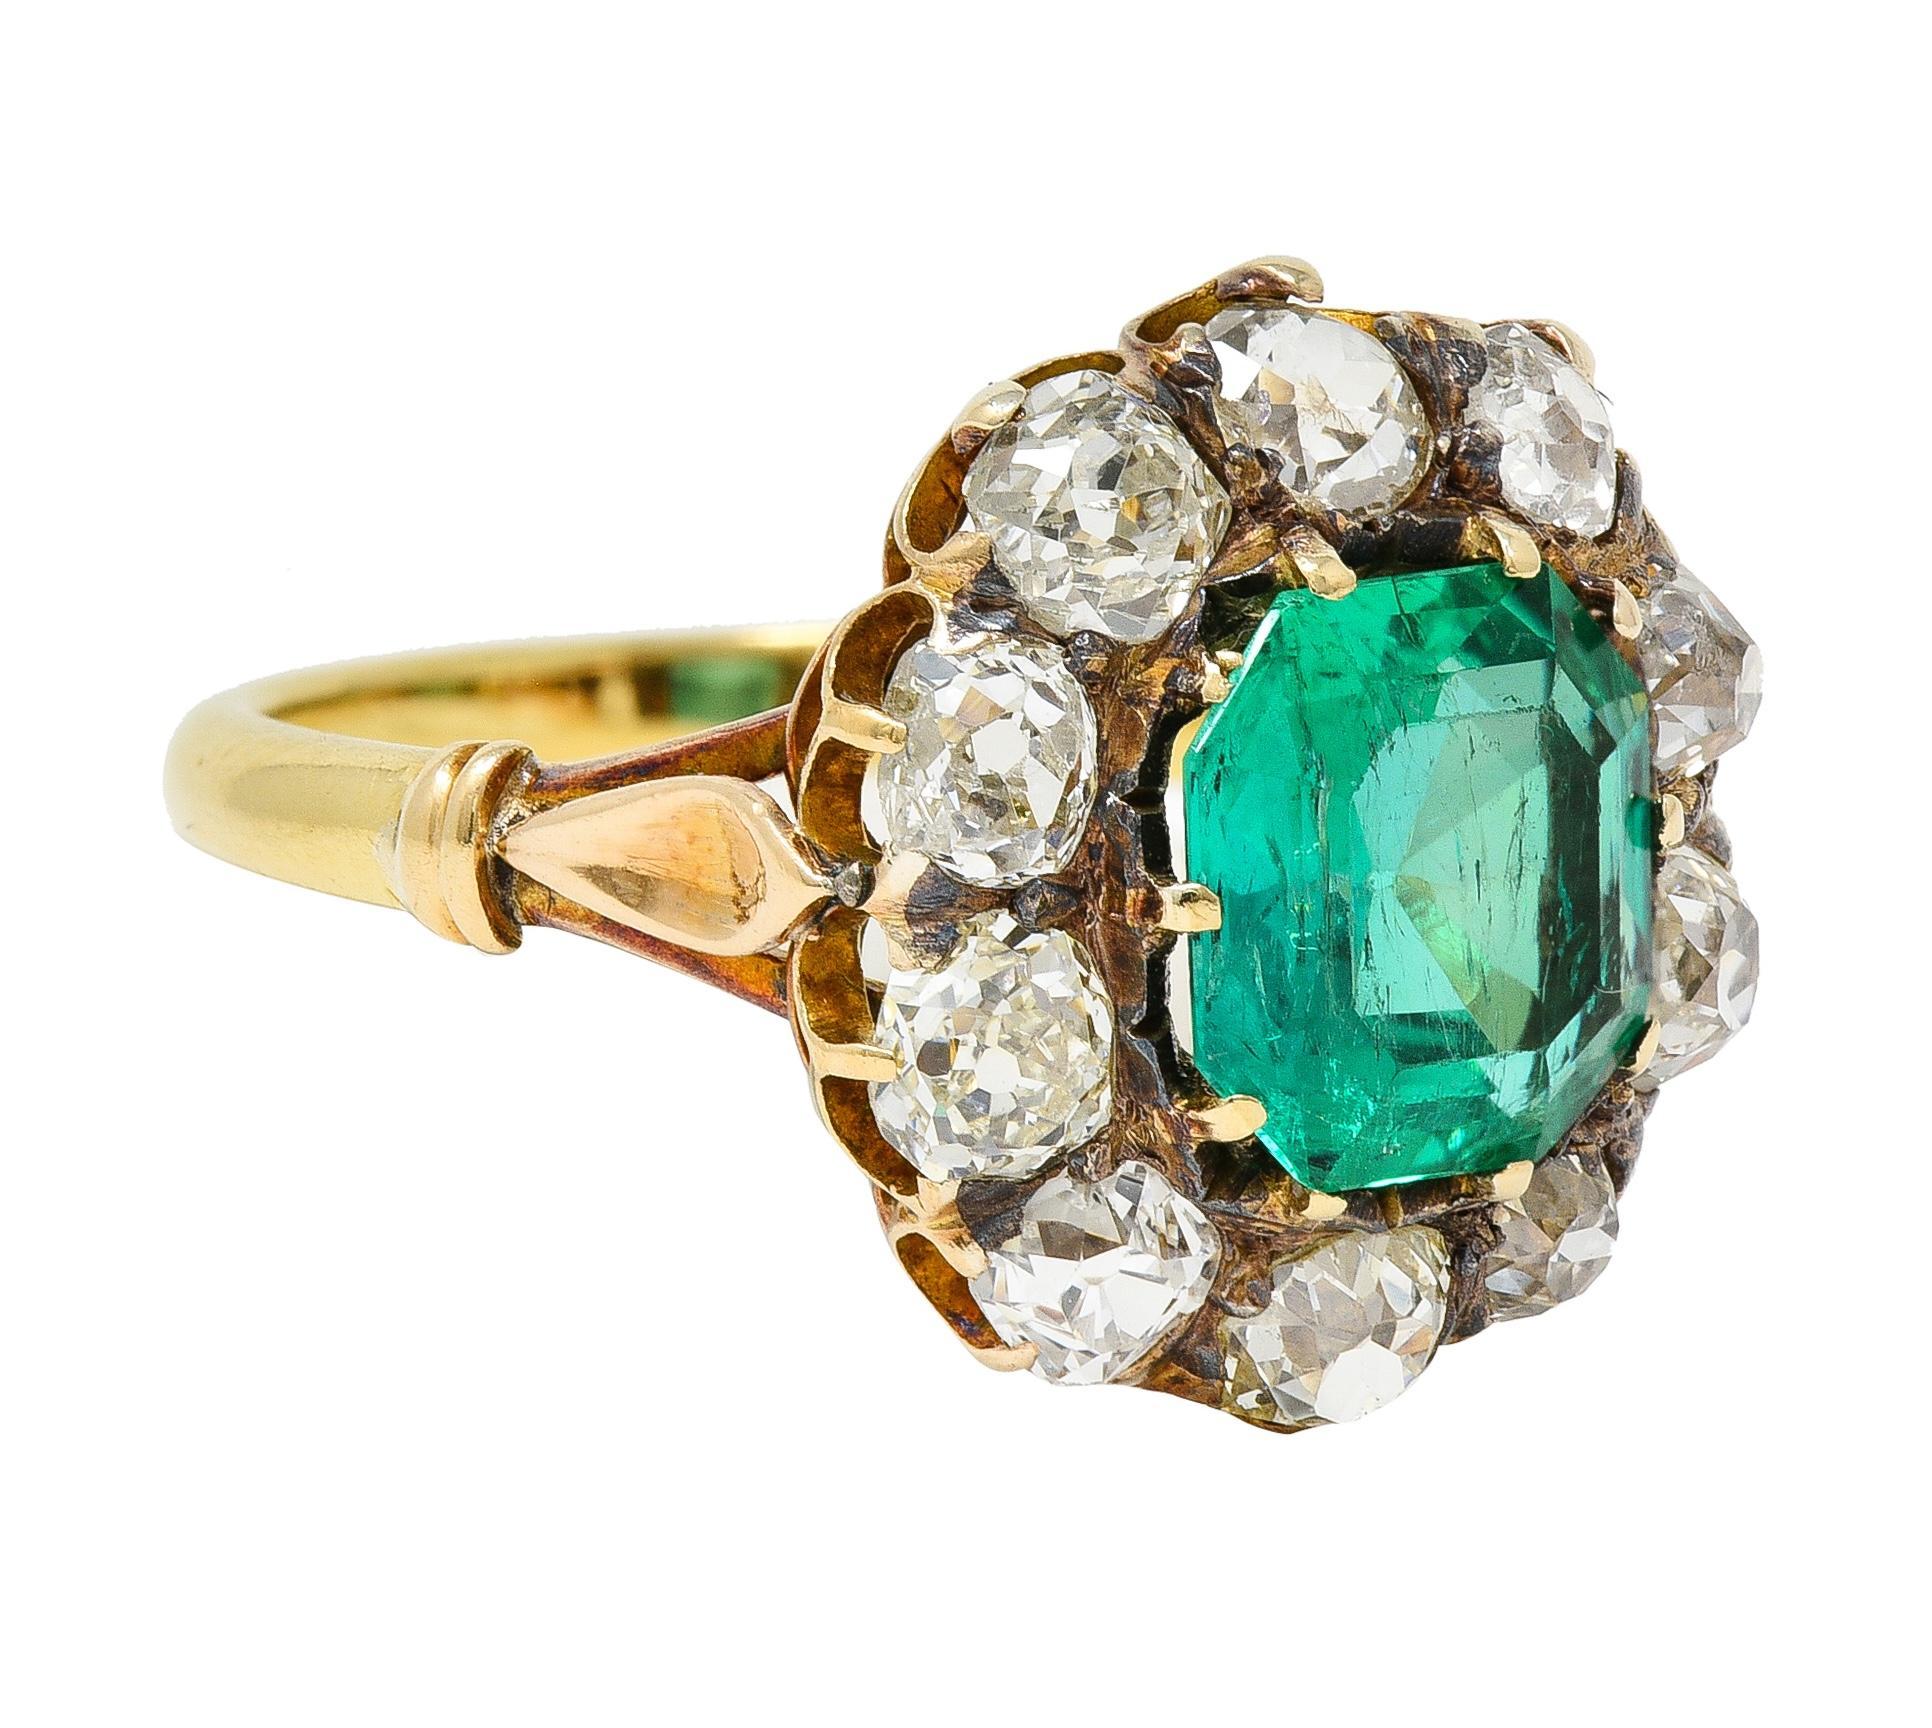 Centering an octagonal step-cut emerald weighing 2.04 carats - transparent medium green 
Natural Colombian in origin with minor traditional clarity enhancement(F2)
Prong set with a halo surround of old mine cut diamonds 
Weighing approximately 2.24